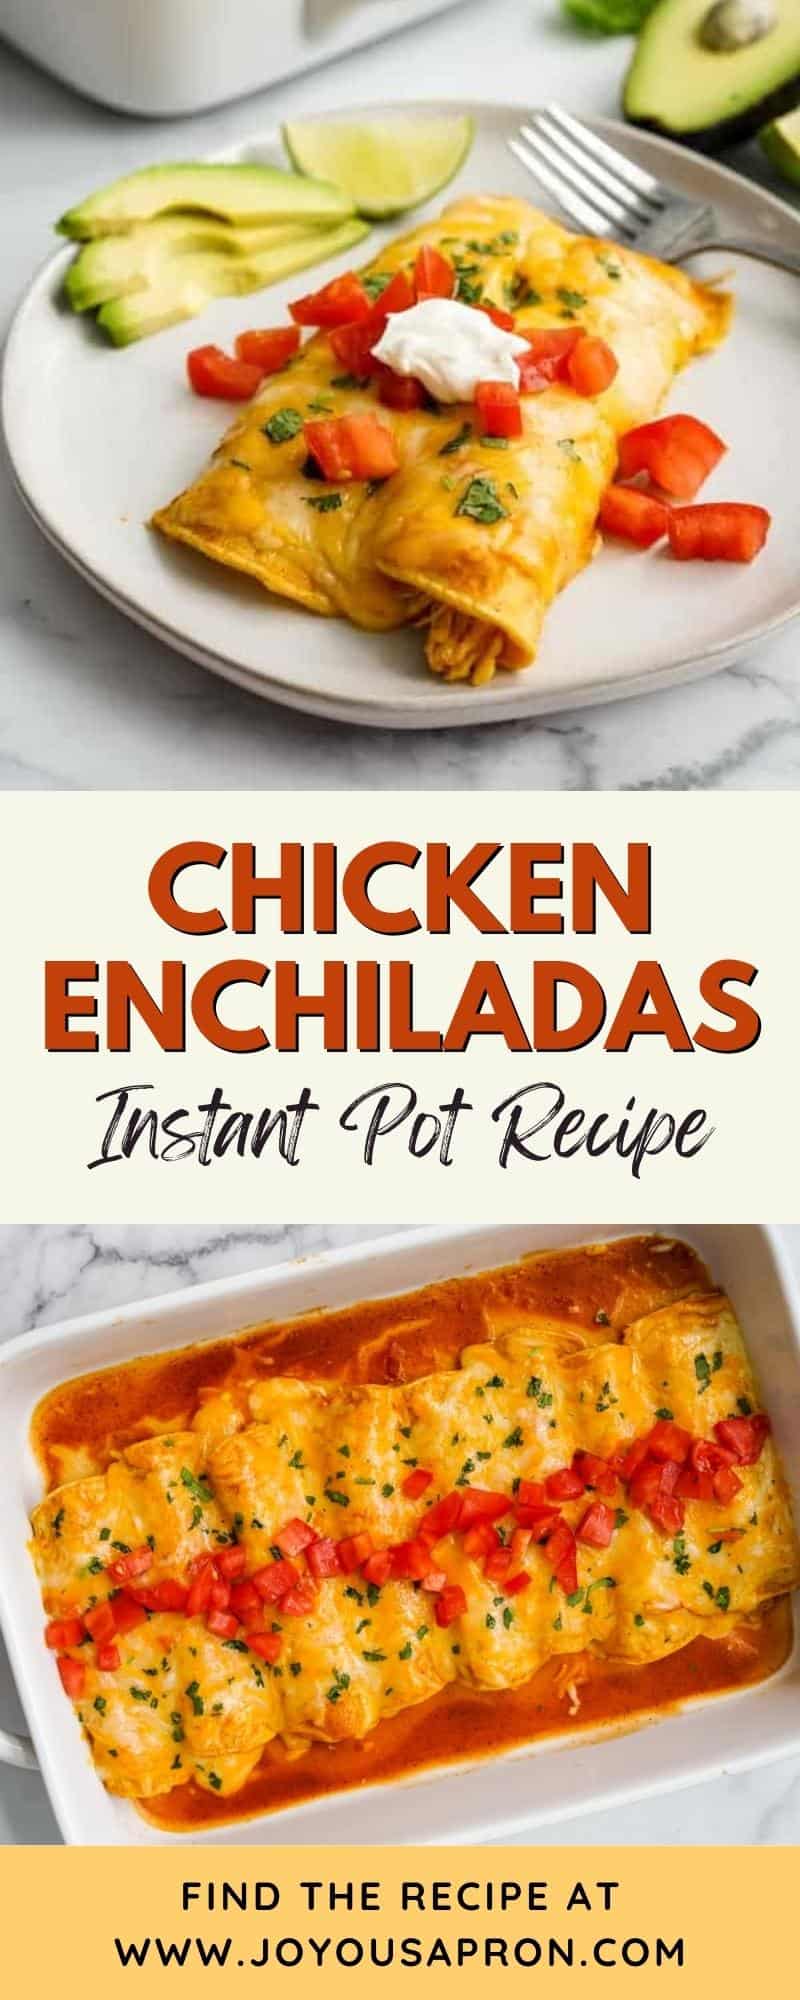 Chicken Enchilada - made in the Instant Pot, this classic Mexican and Tex-Mex recipe is easy and yum! Flavorful chicken and cheese wrapped in a corn tortilla, smothered in enchilada sauce. via @joyousapron